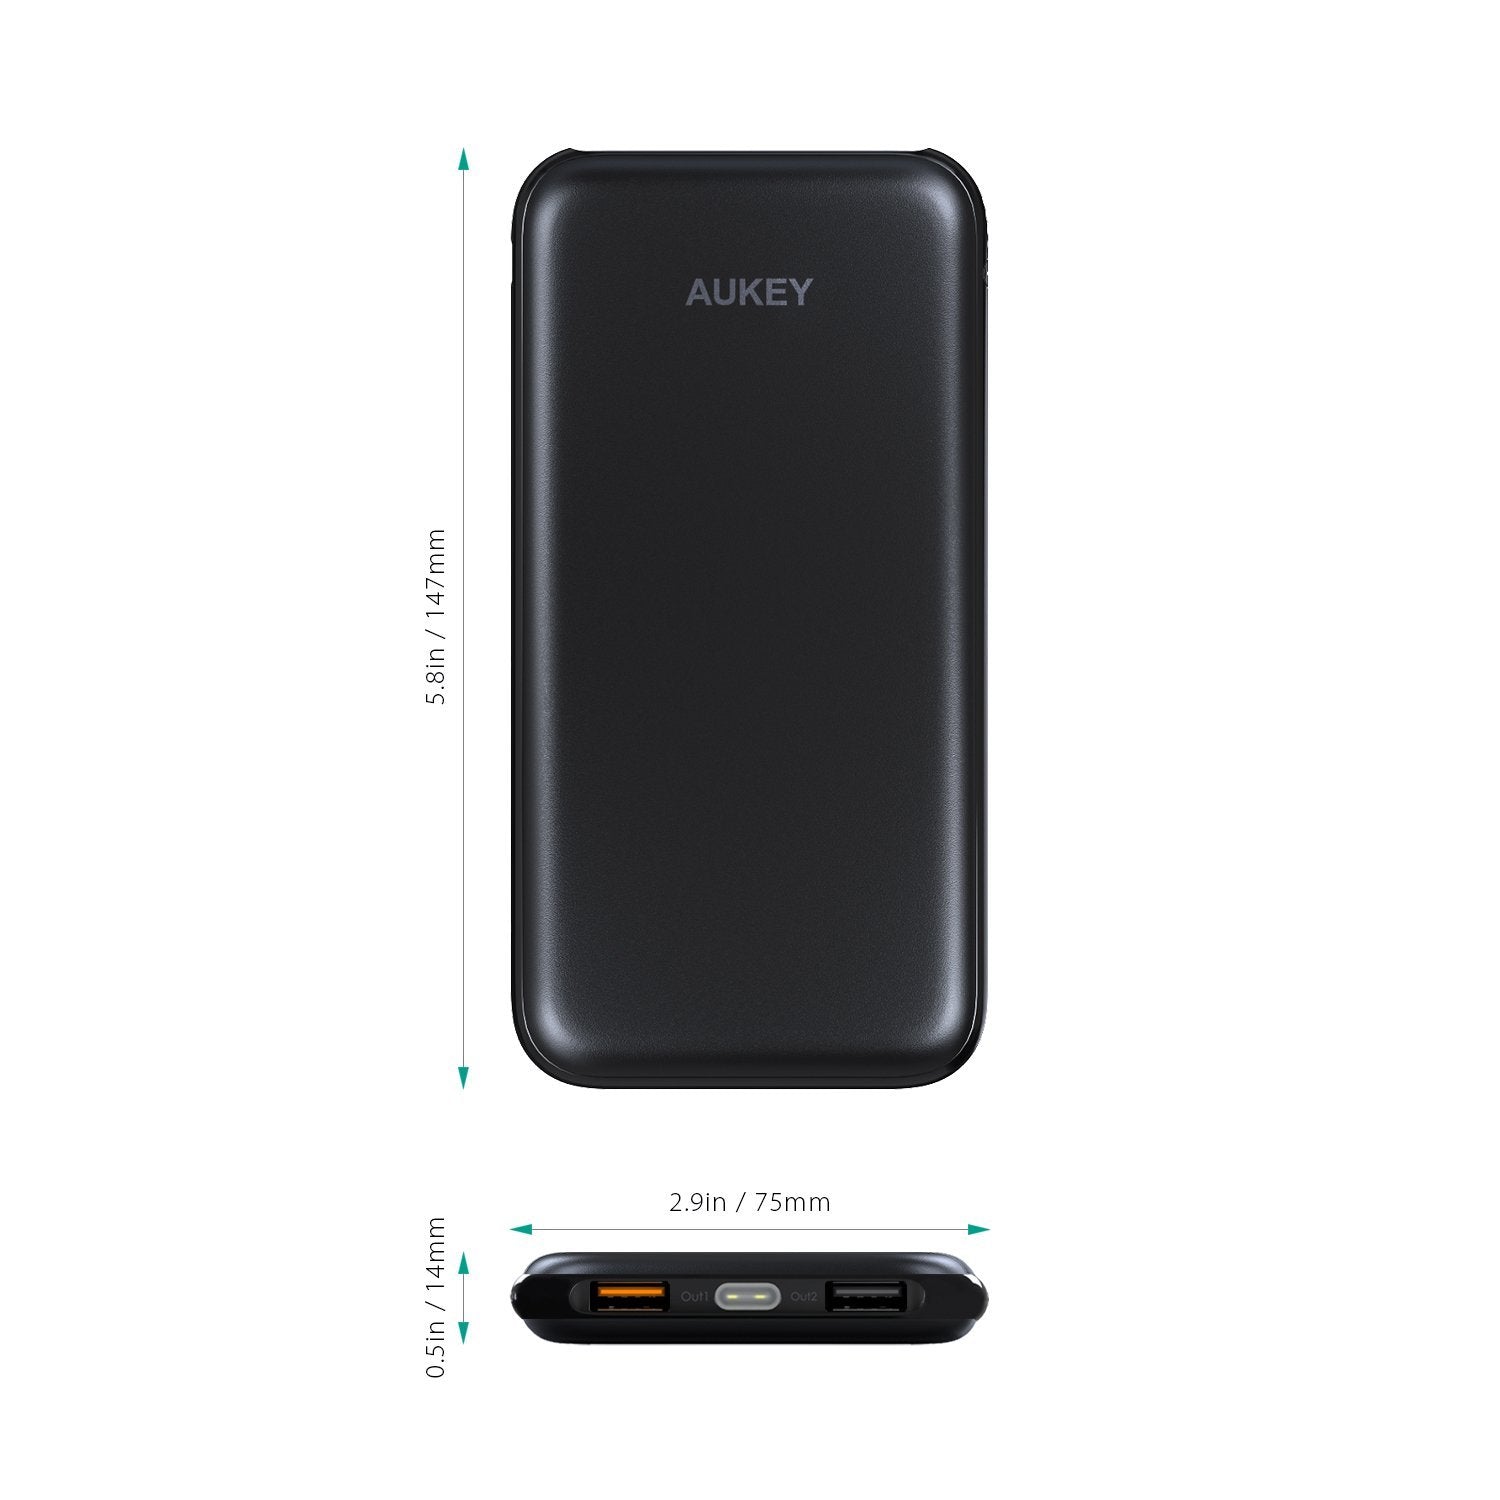 AUKEY PB-T18 10000mAh Qualcomm Quick Charge 3.0 Slimline Power Bank - Aukey Malaysia Official Store